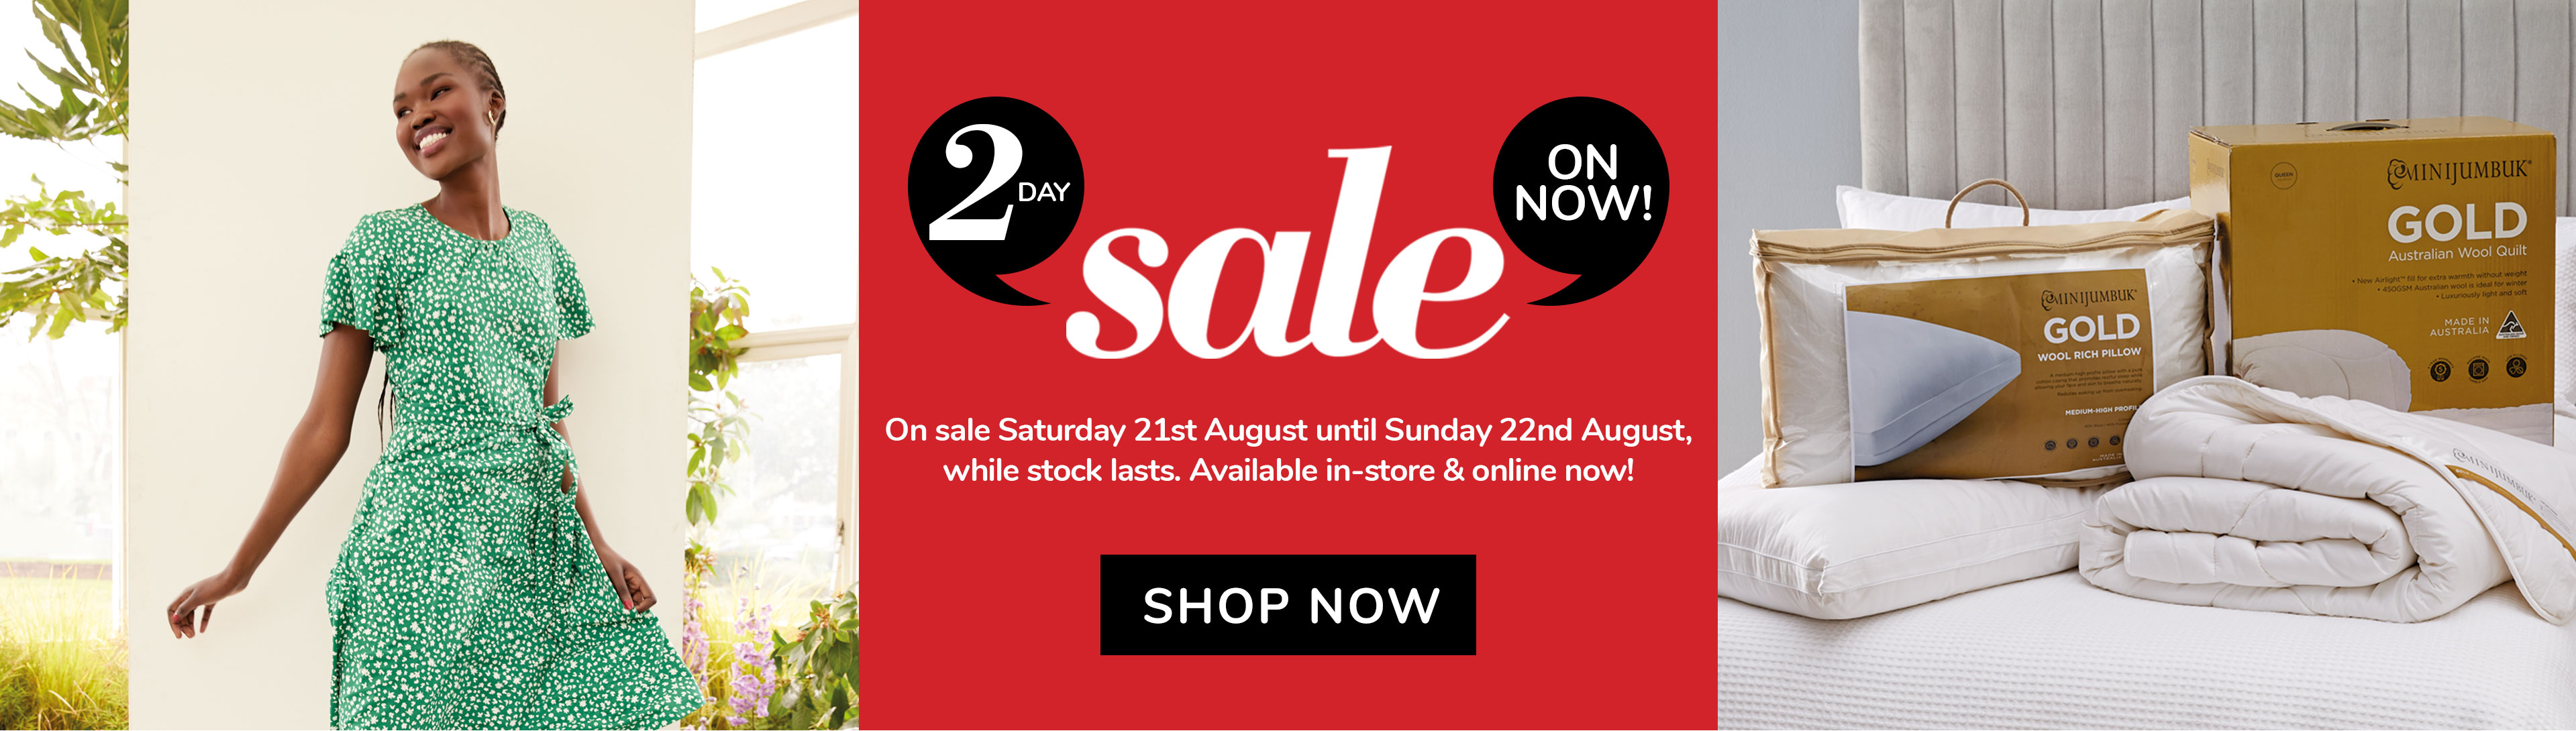 2 Day sale - Up to 50% OFF on clothing, footwear, kitchenware & more